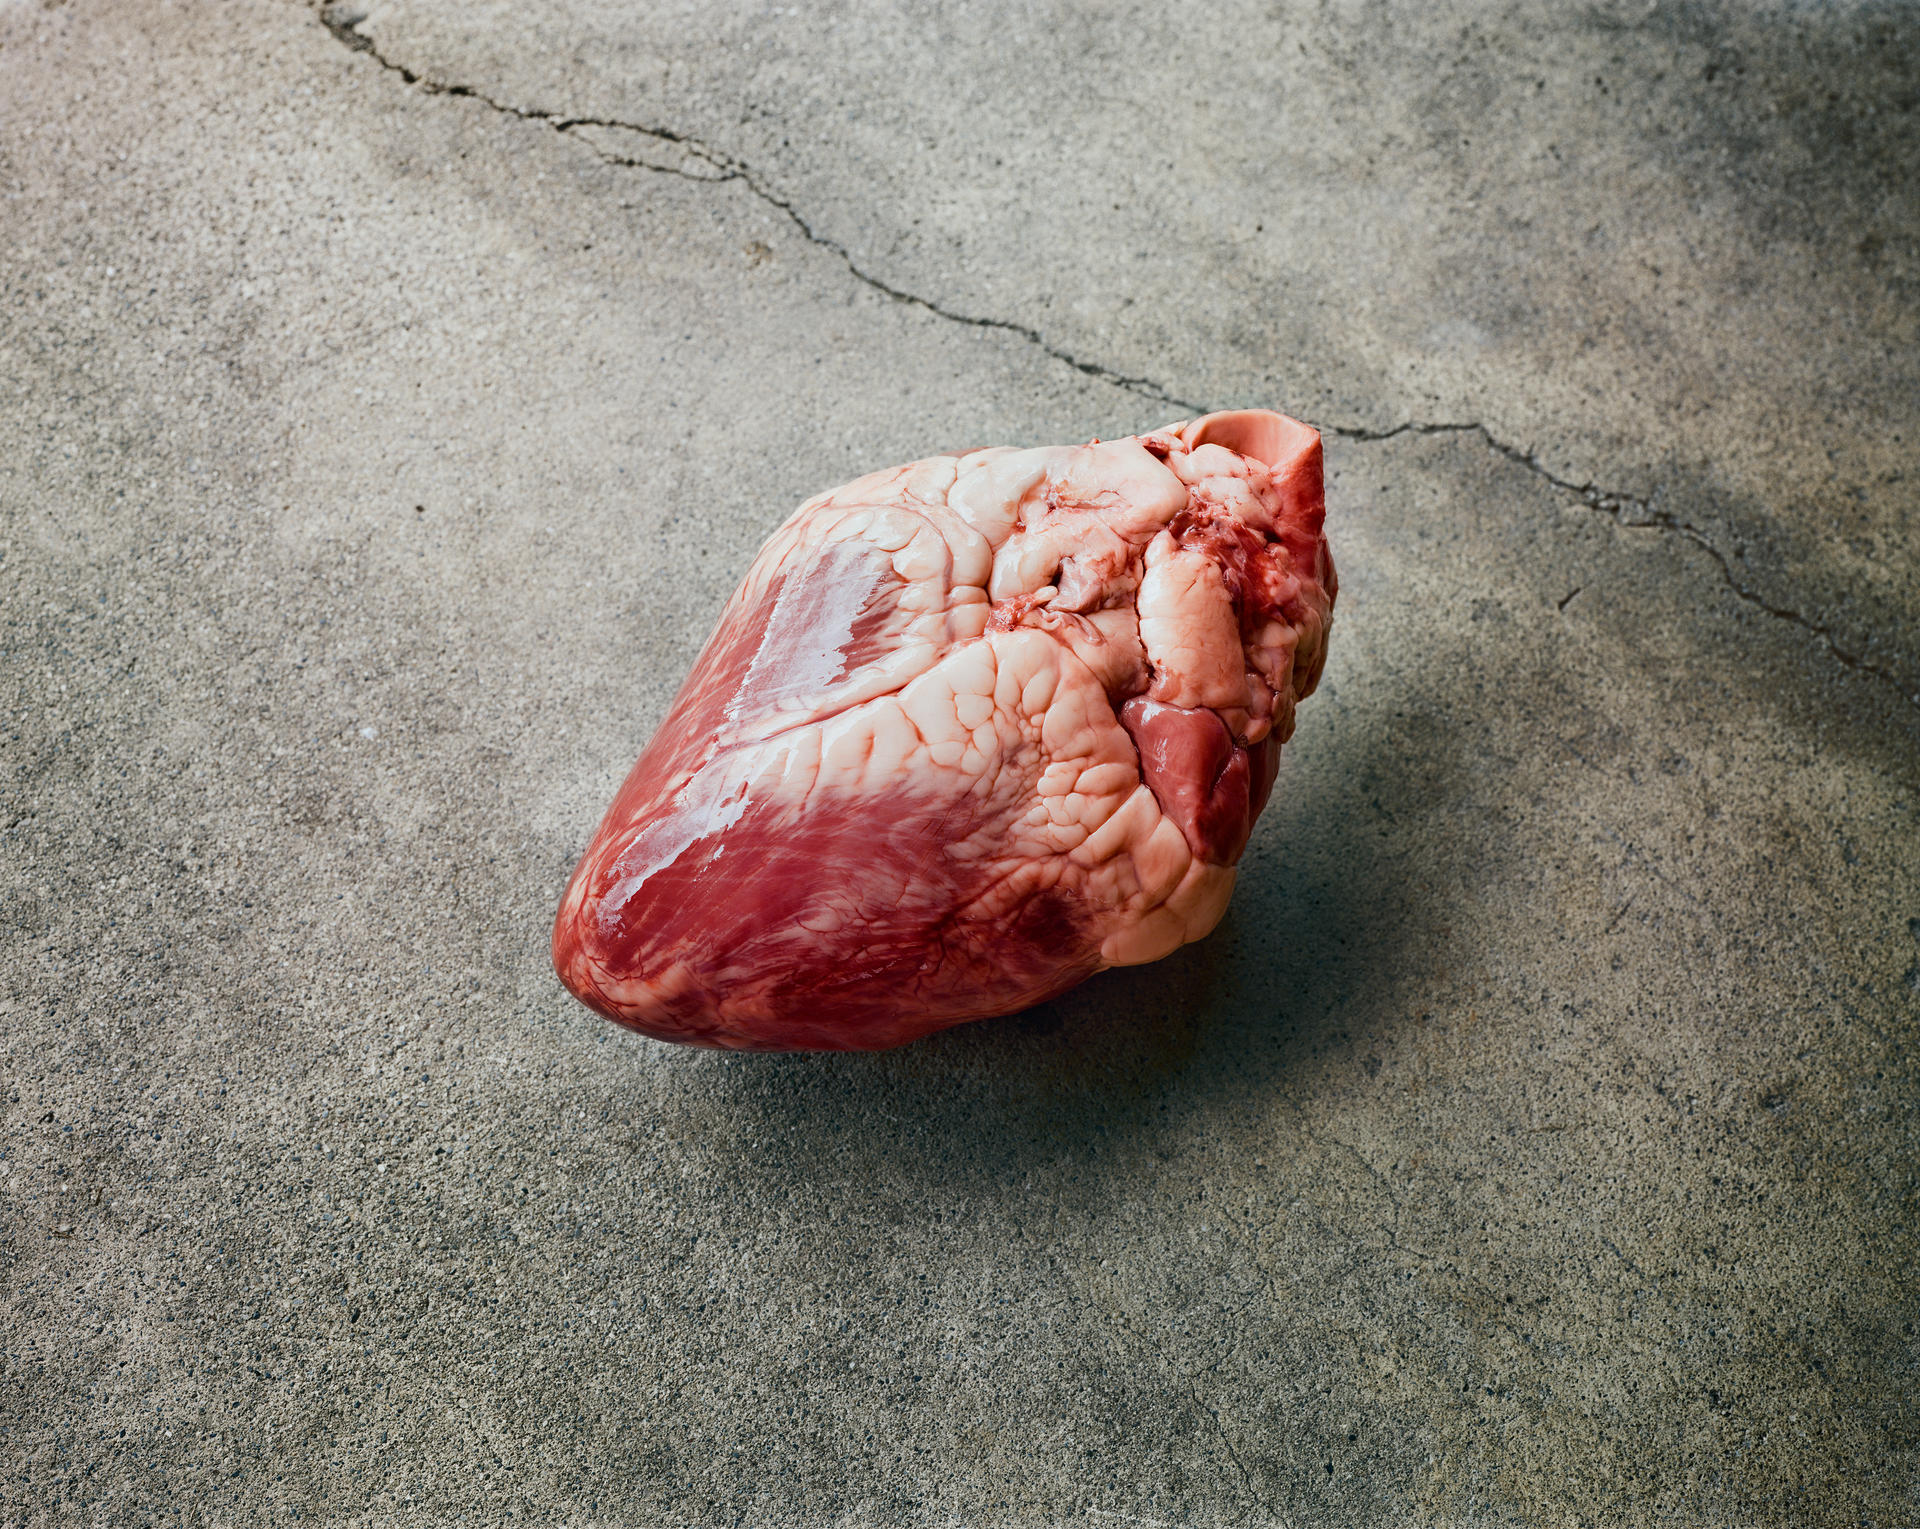 A color photograph of a red calf heart placed on a concrete surface.